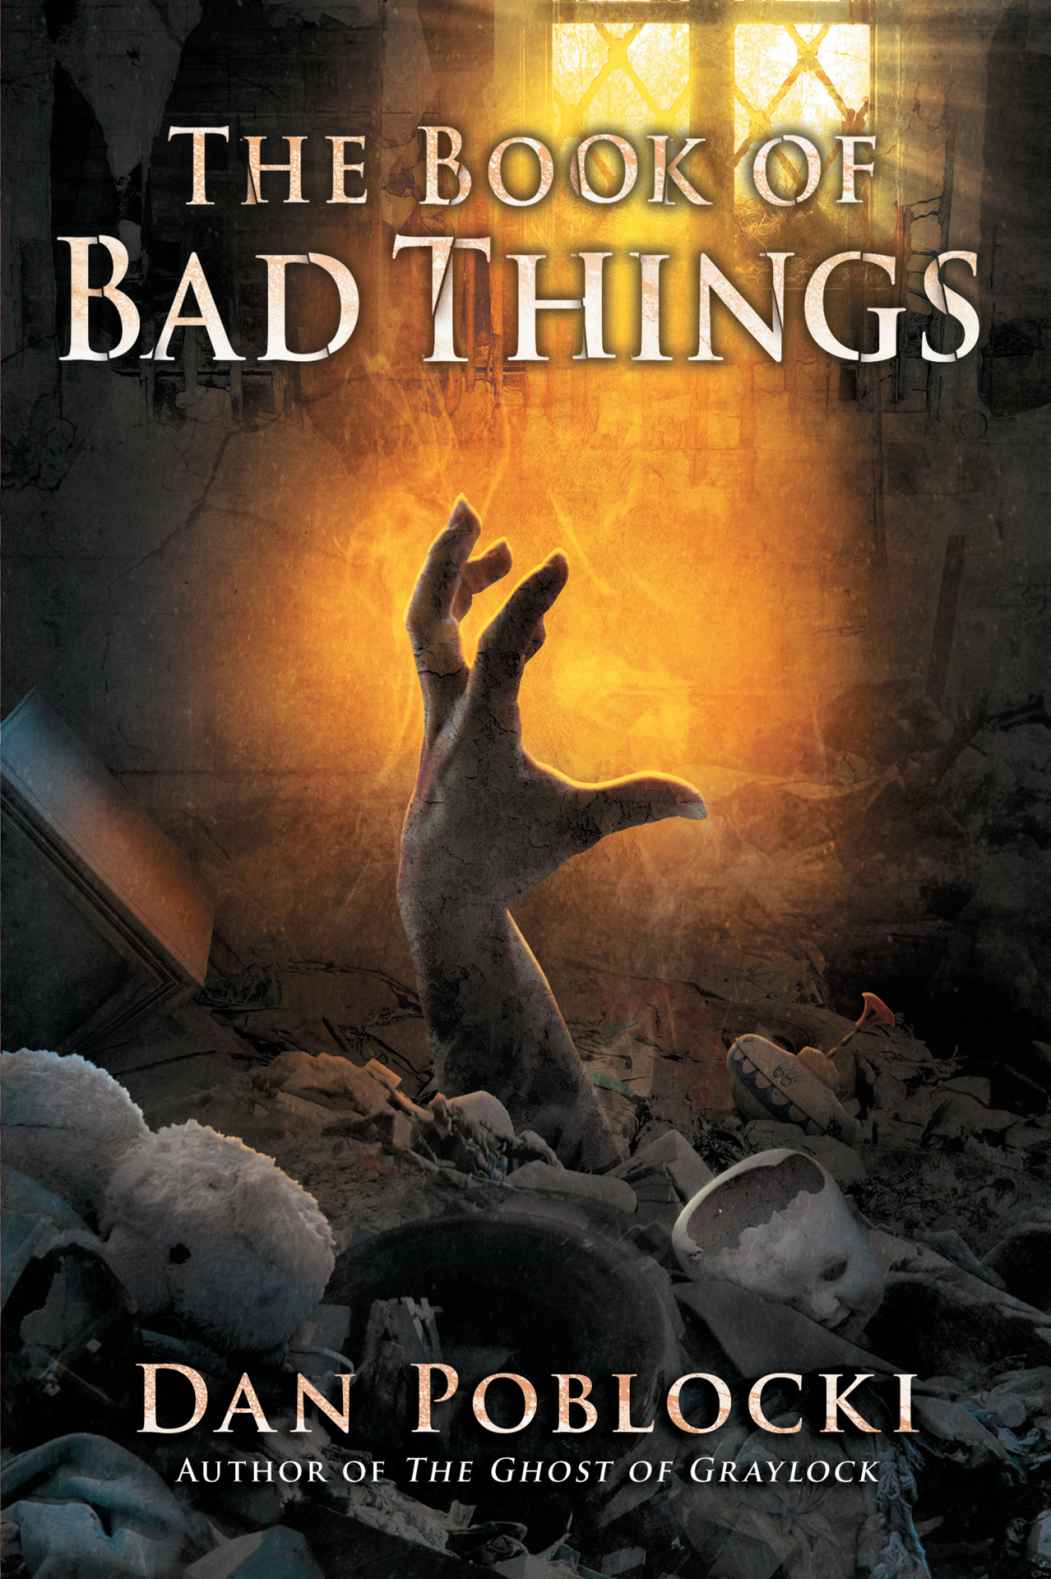 The Book of Bad Things